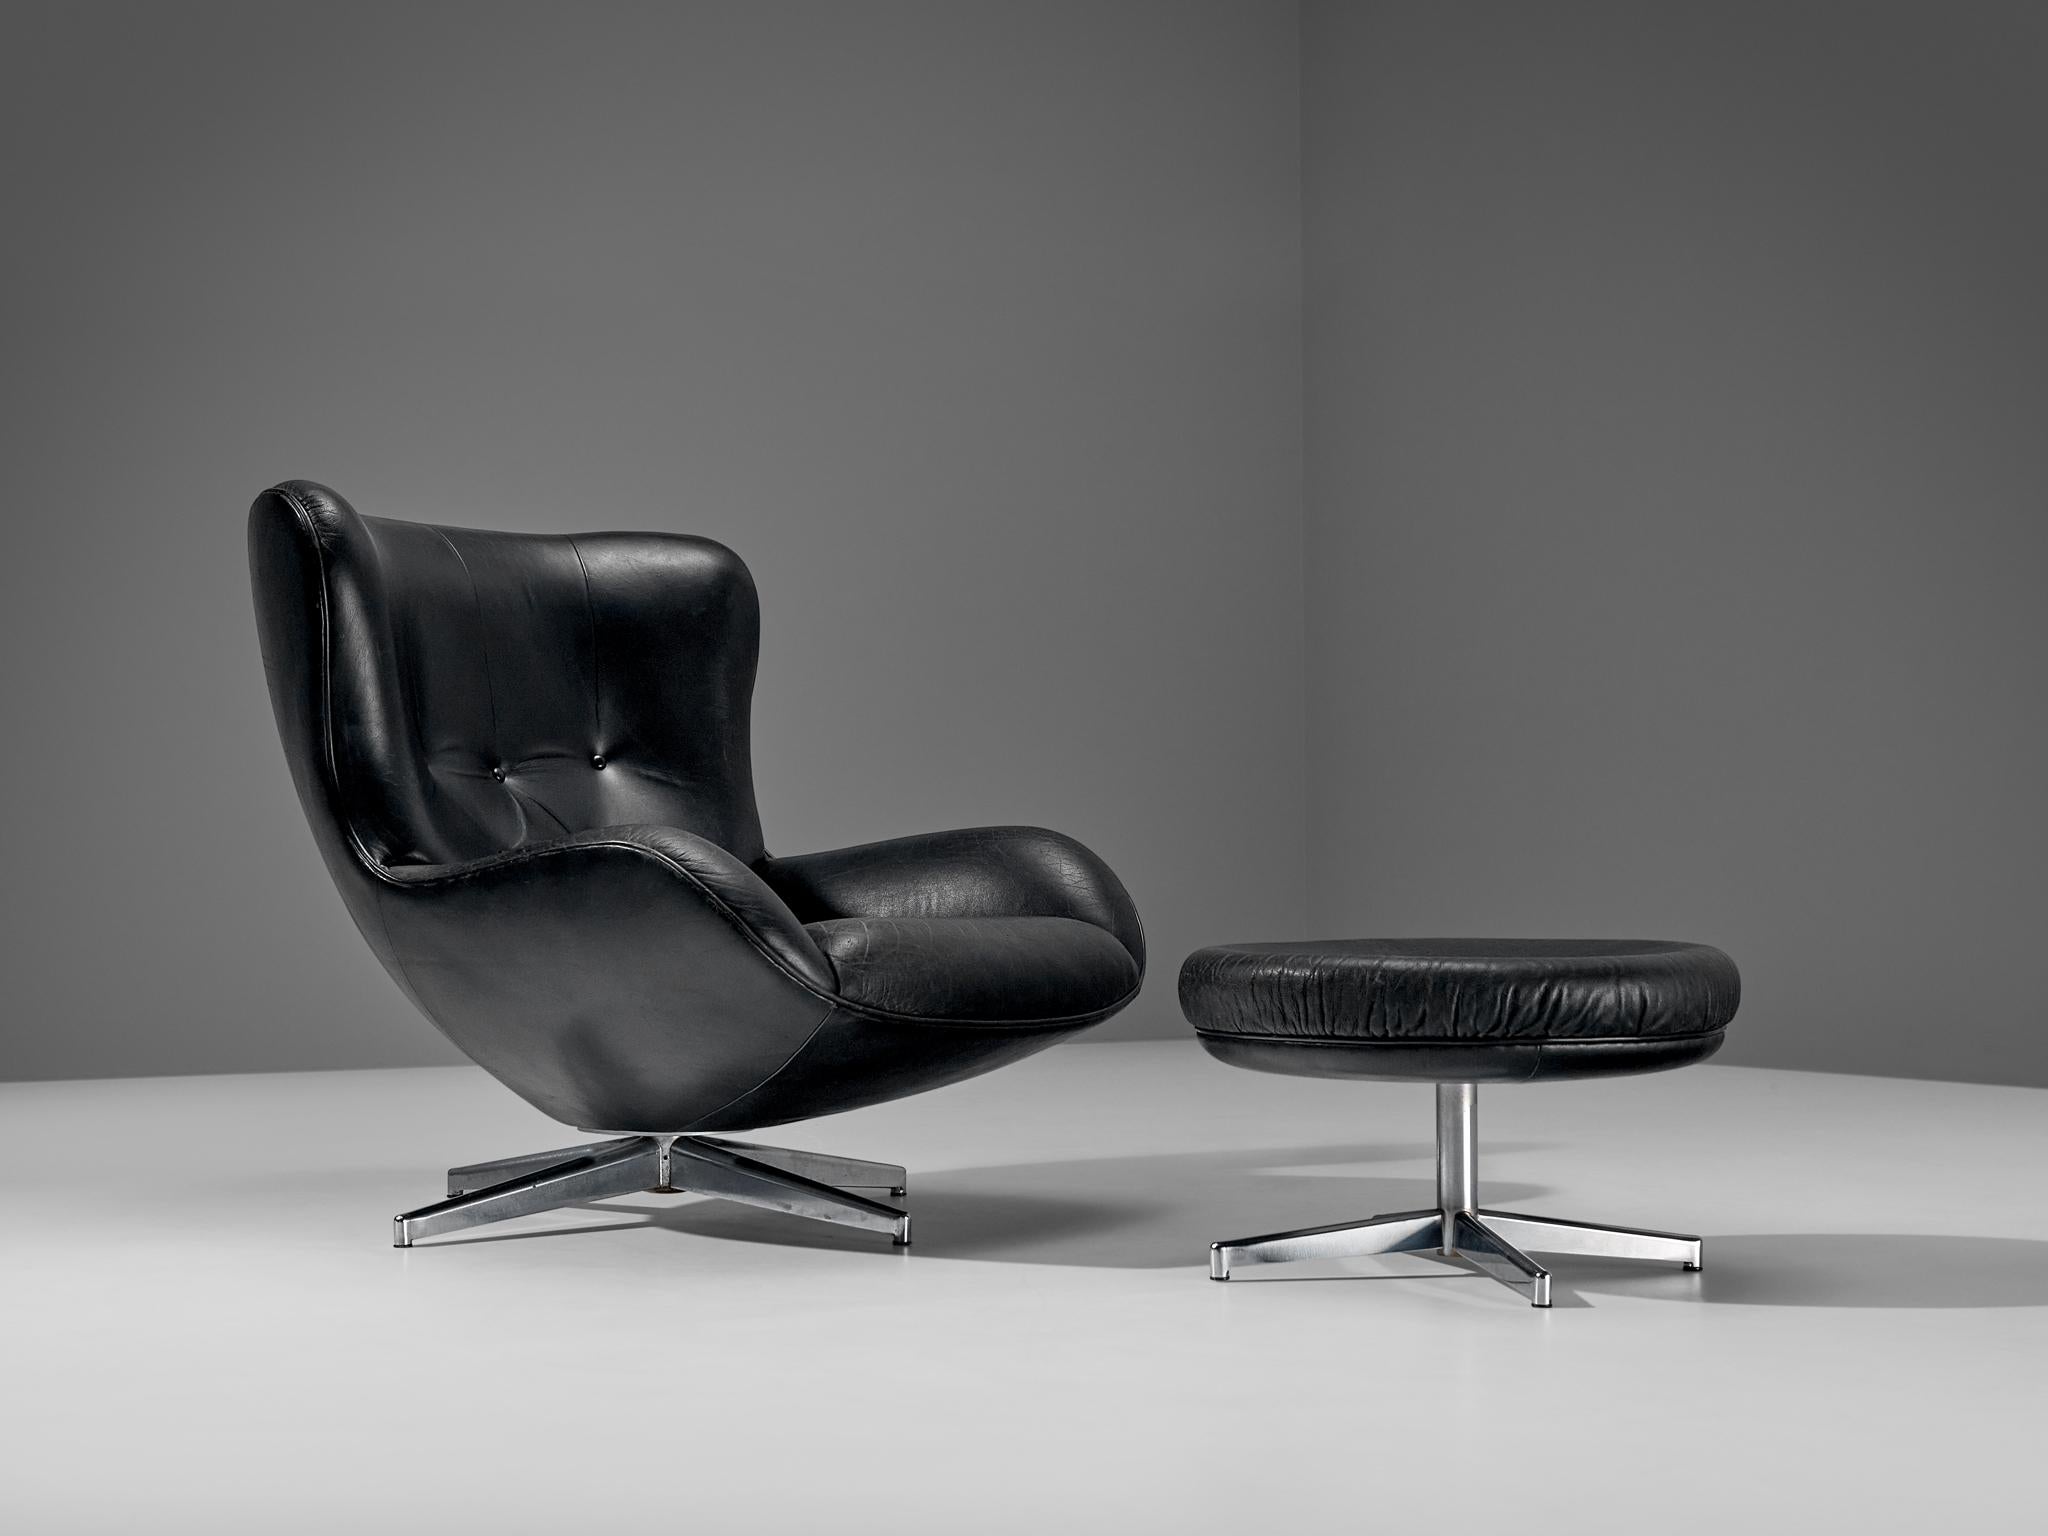 Illum Wikkelsø for A. Mikael Laursen, swivel lounge chair with ottoman model ML214, black leather, metal, Denmark, 1960s

Organic shaped easy chair in patinated black leather by Danish designer Illum Wikkelsø. This swivel chair shows some nice